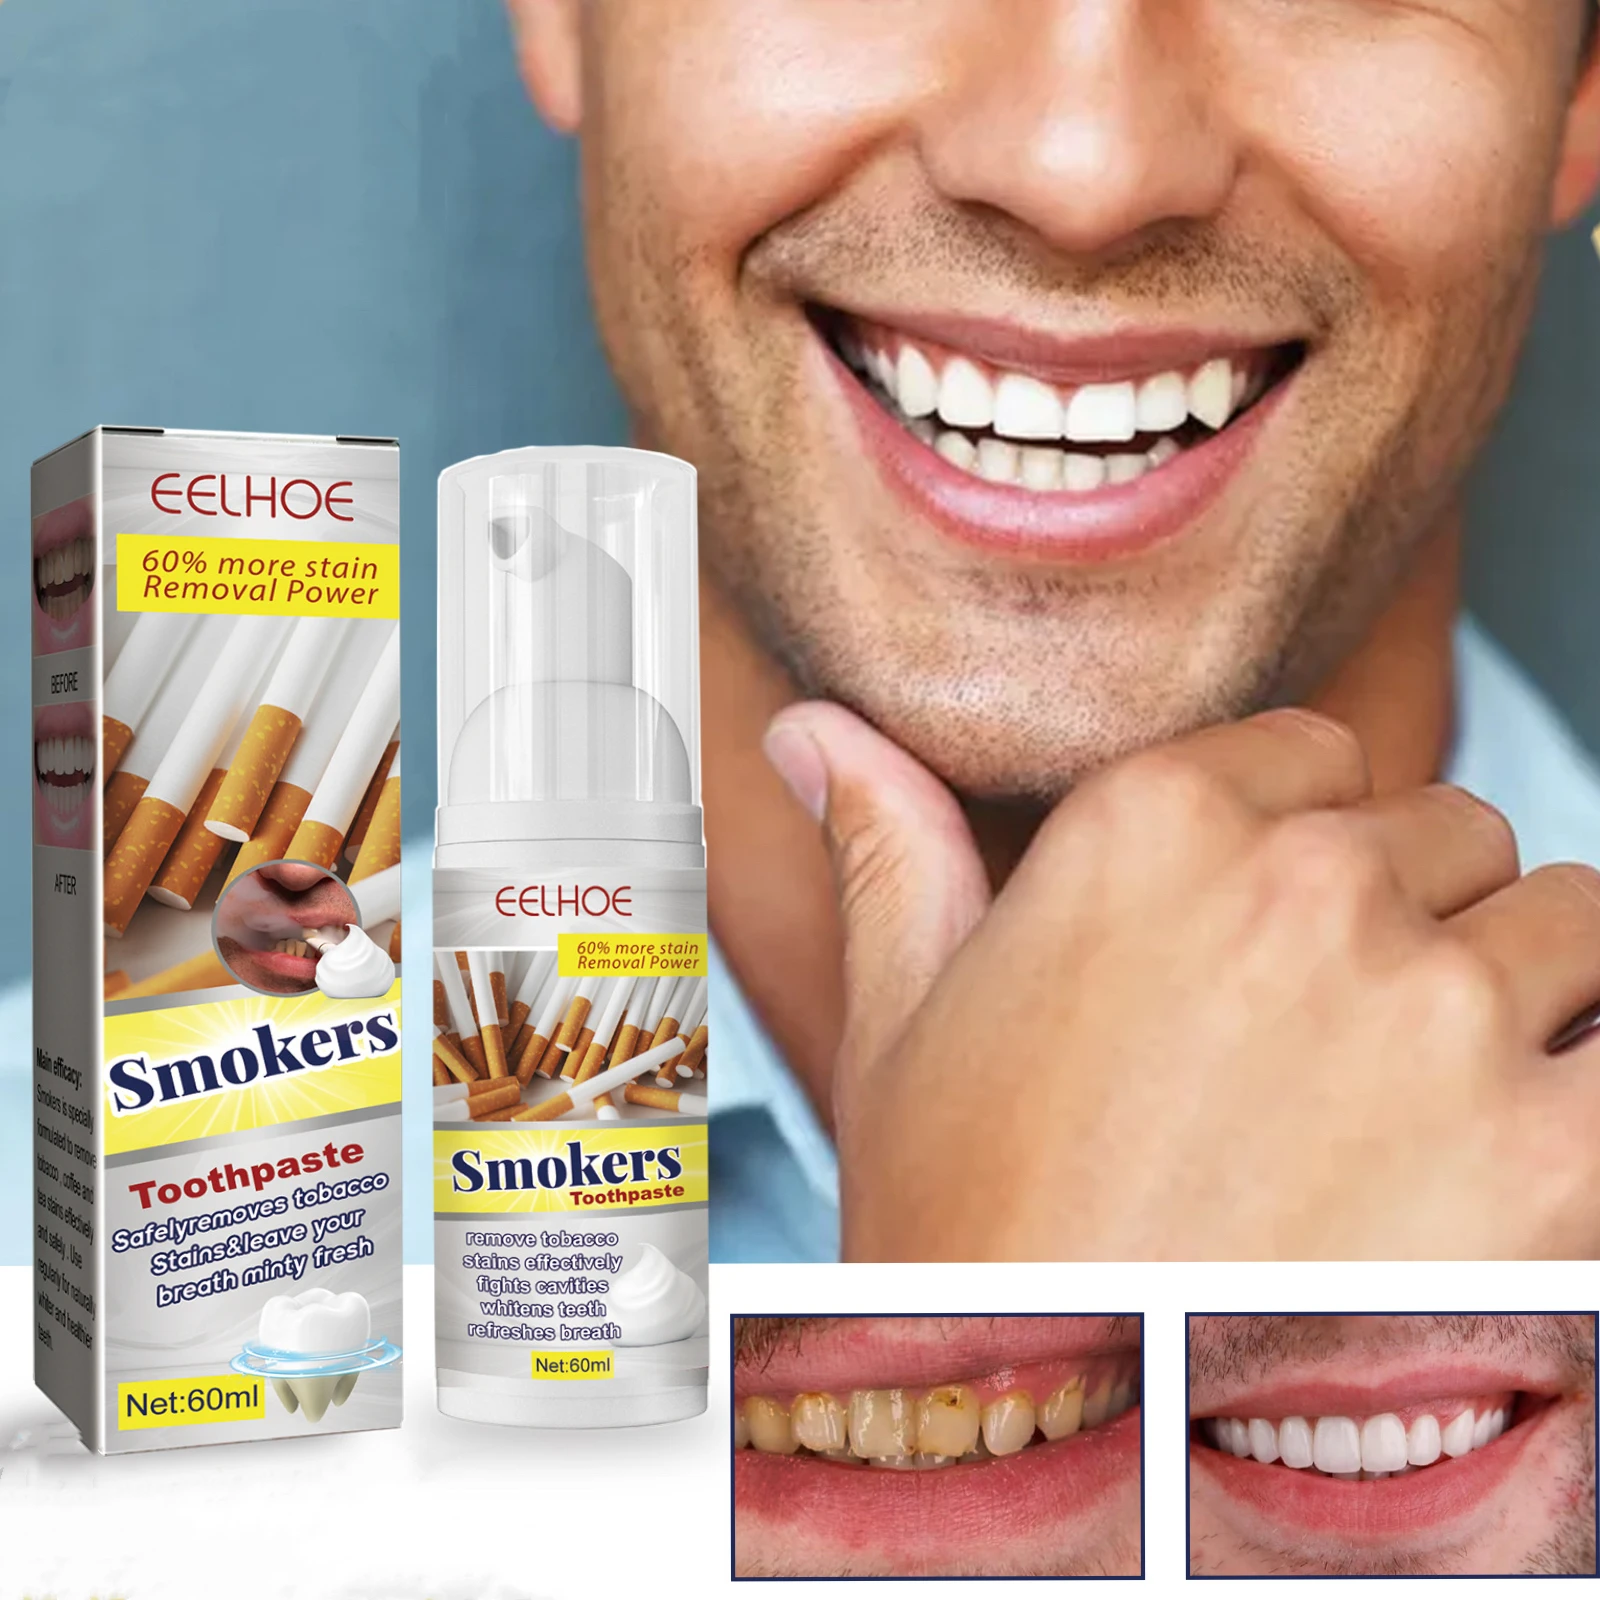 Smoke stain removal stain tooth yellow clean teeth brightening fresh oral care toothpaste healthy and beautiful